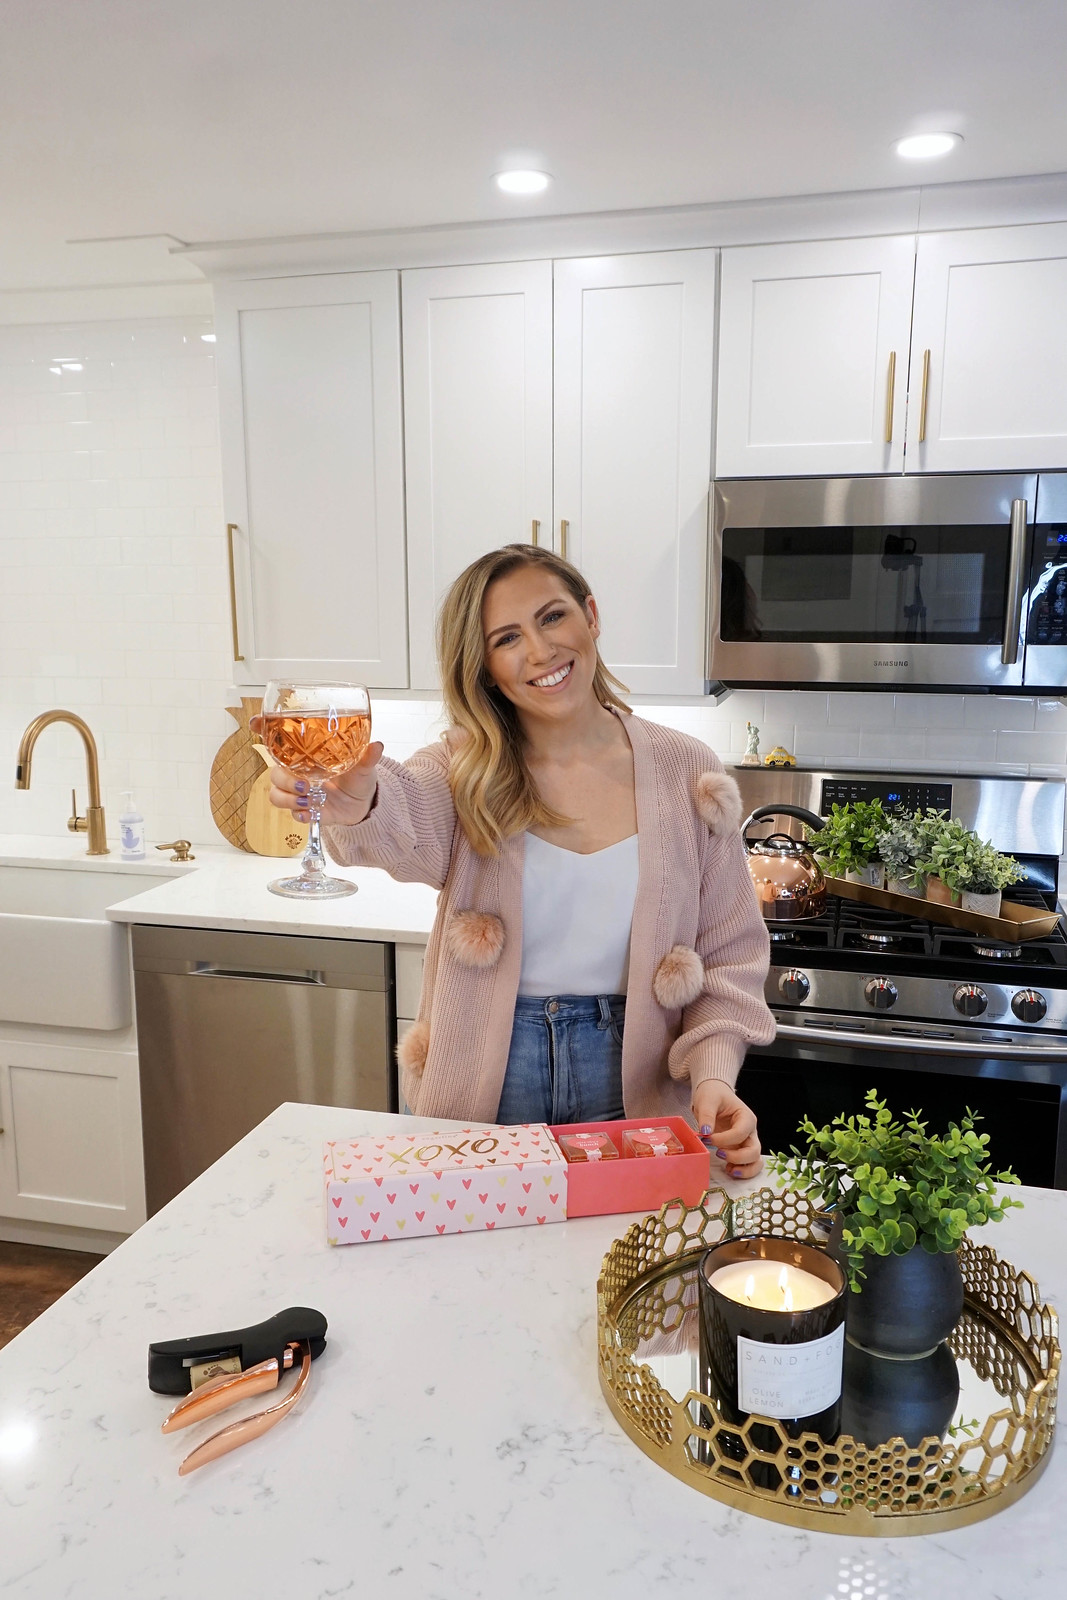 Pink Pom Pom Cardigan Cheers Rose Wine White Kitchen Gold Hardware Stainless Steel Appliances